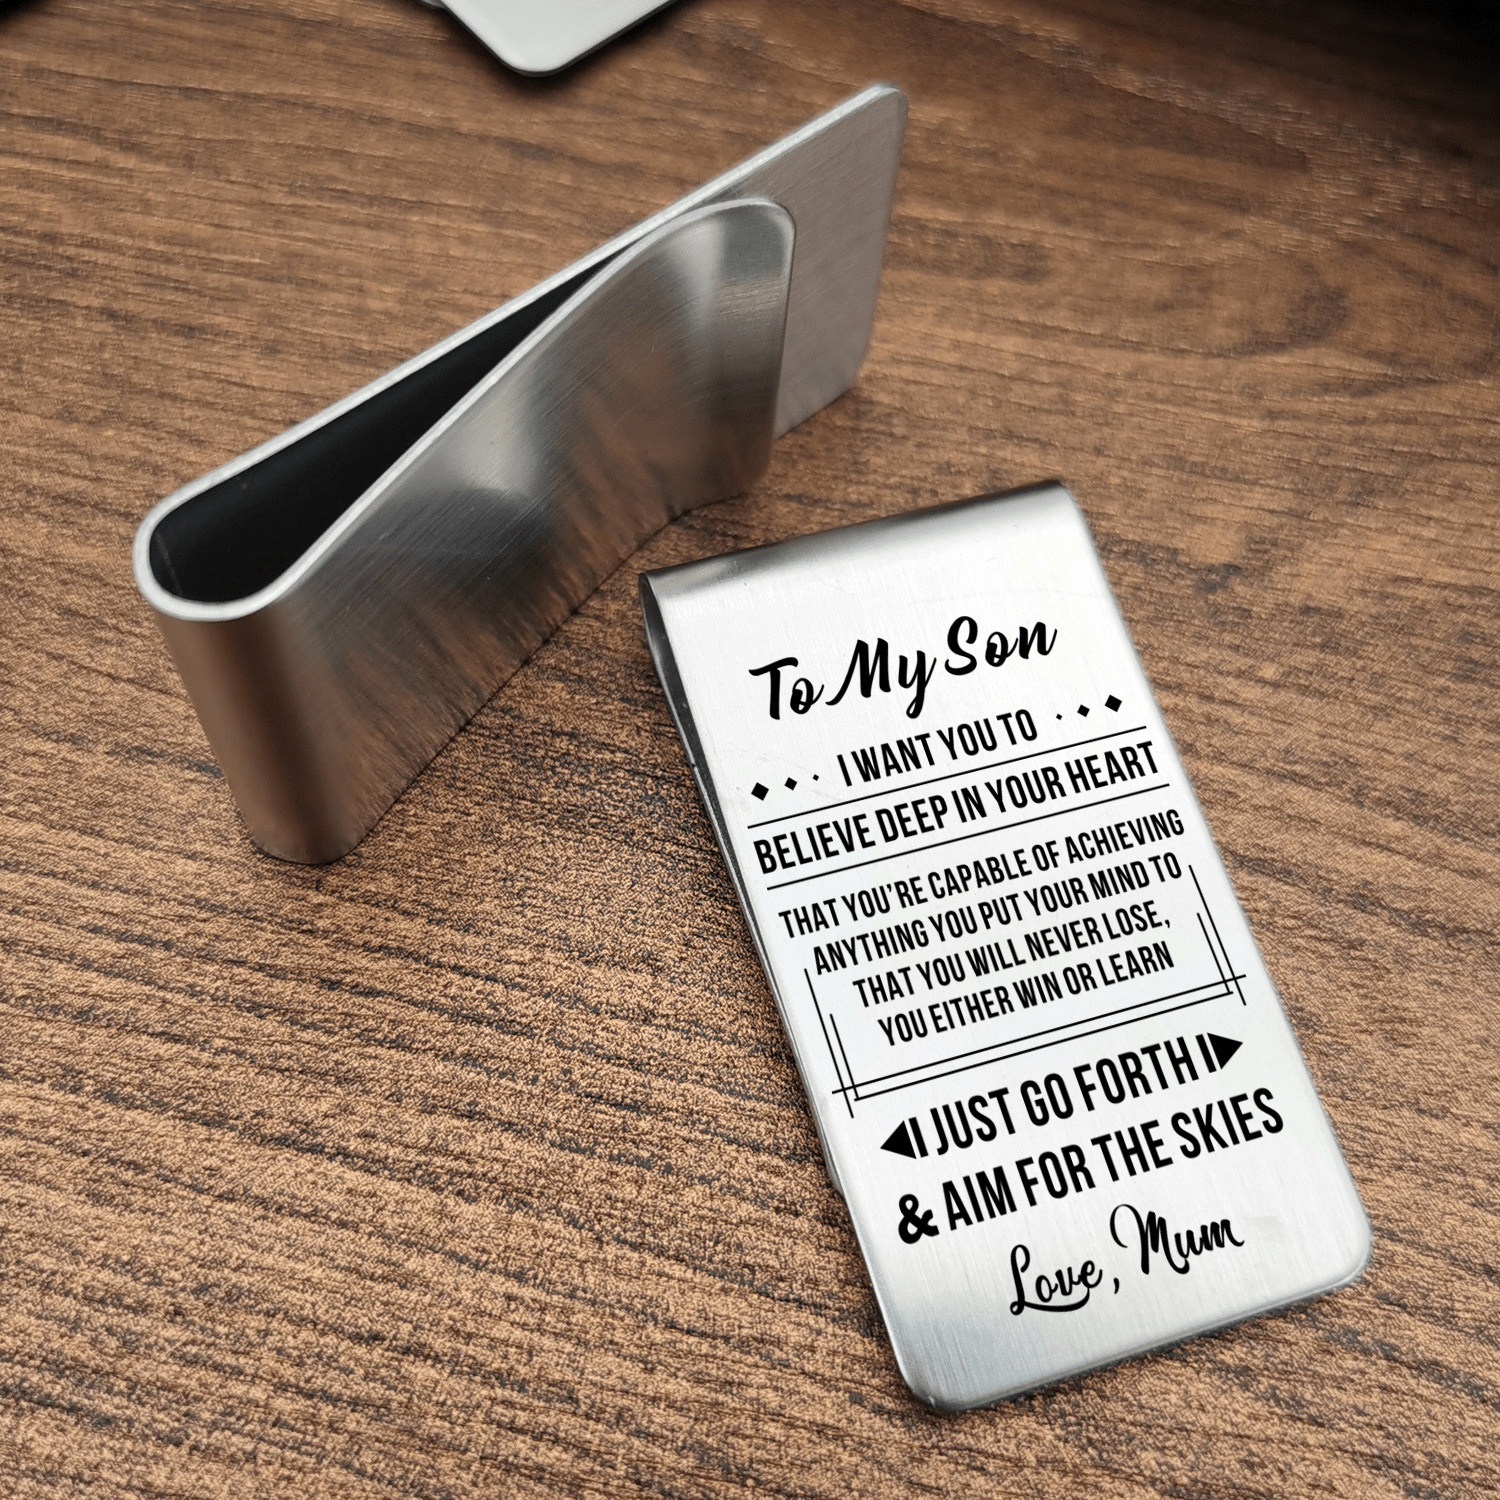 Money Clips Mum To Son - Believe Deep In Your Heart Engraved Money Clip GiveMe-Gifts